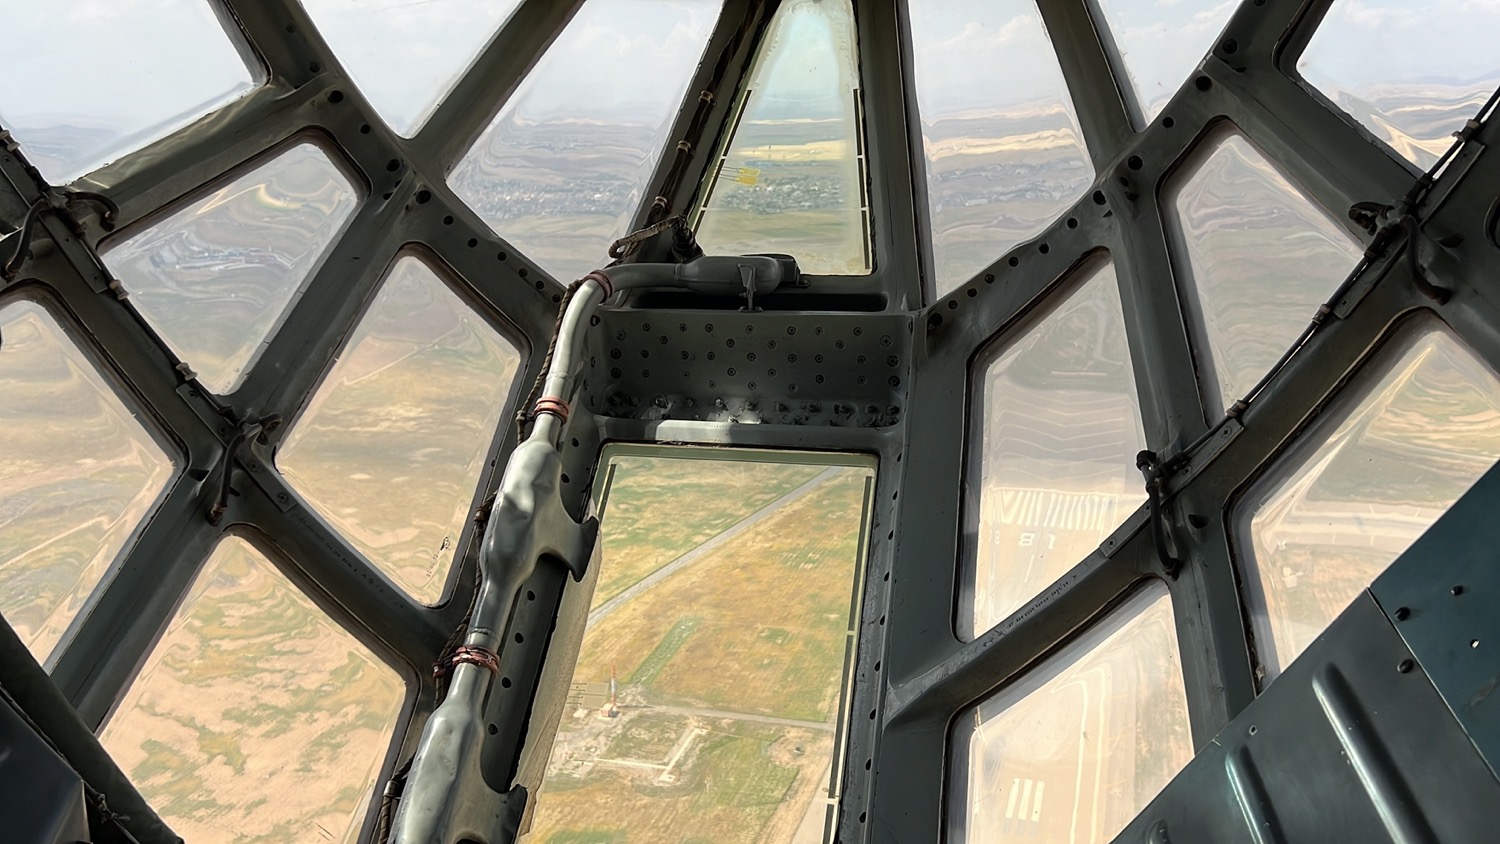 a view from inside of a plane